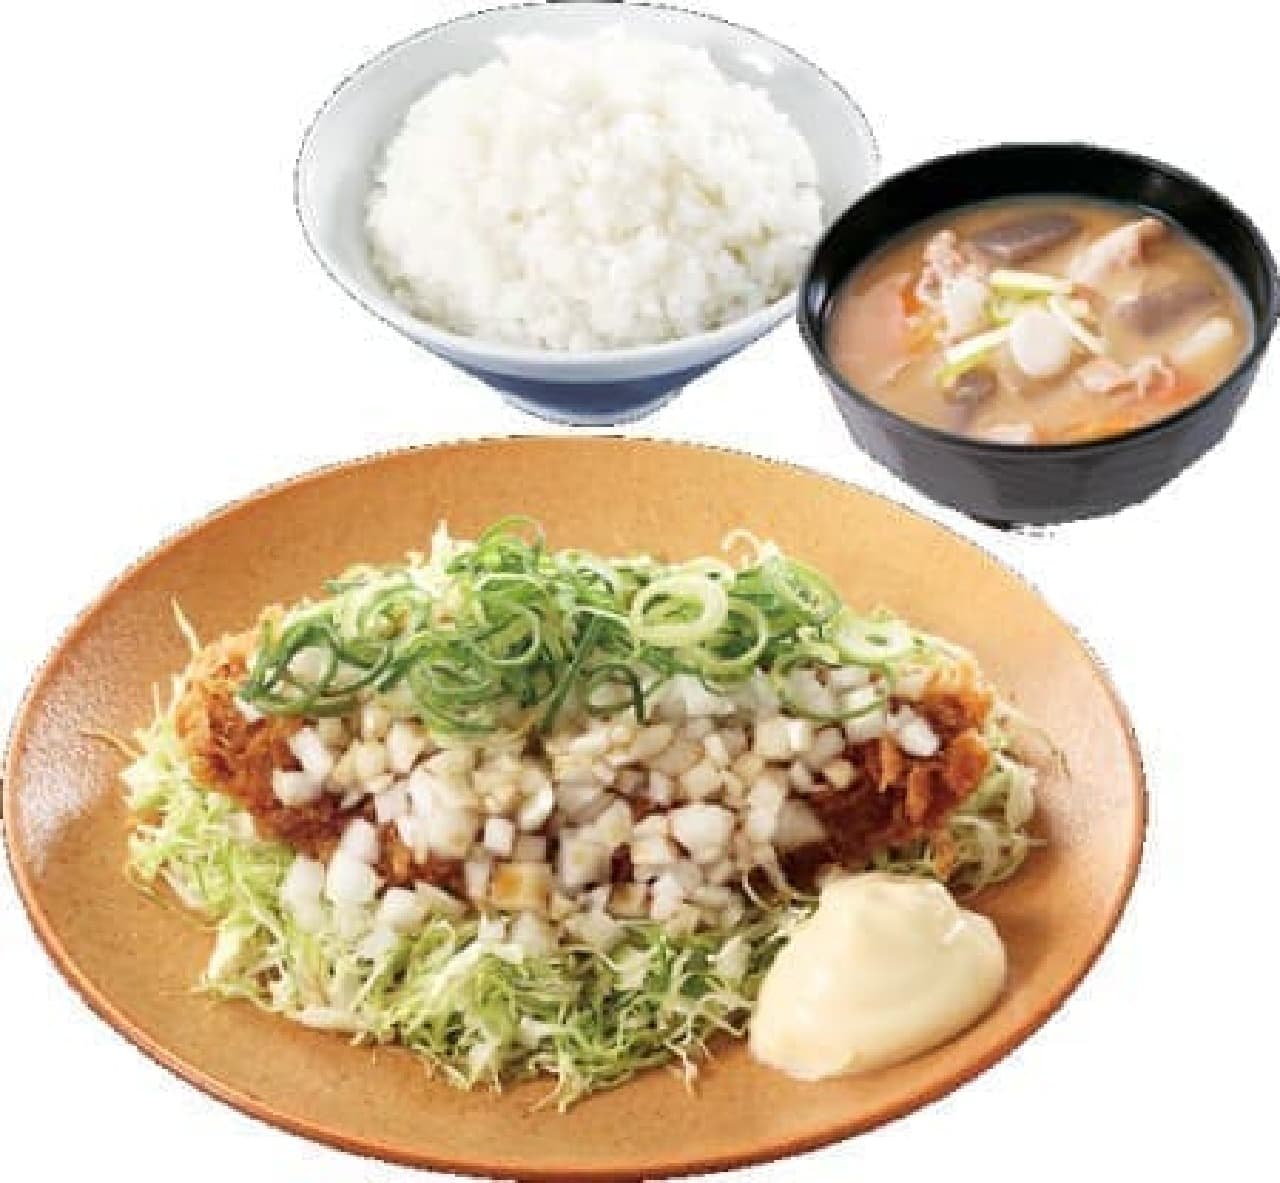 Enjoy a set meal with rice and miso soup